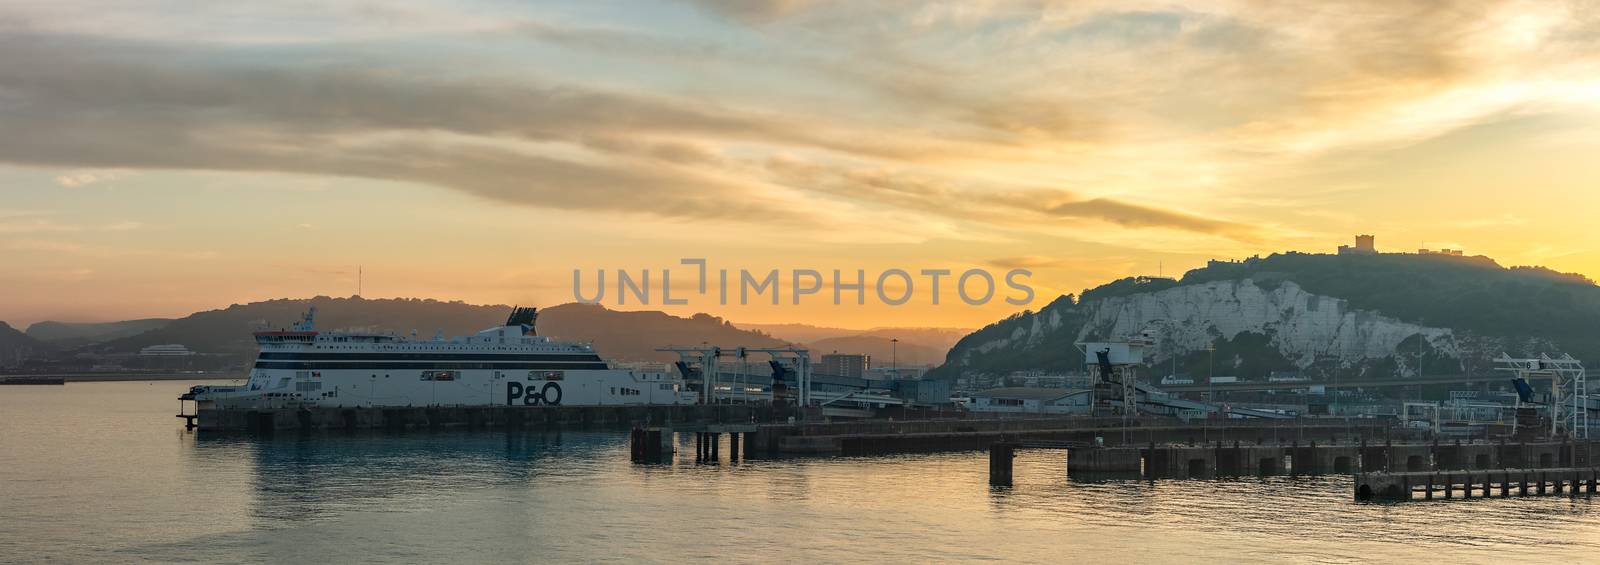 Panoramic shot of Dover Port with a ferry boat by DamantisZ